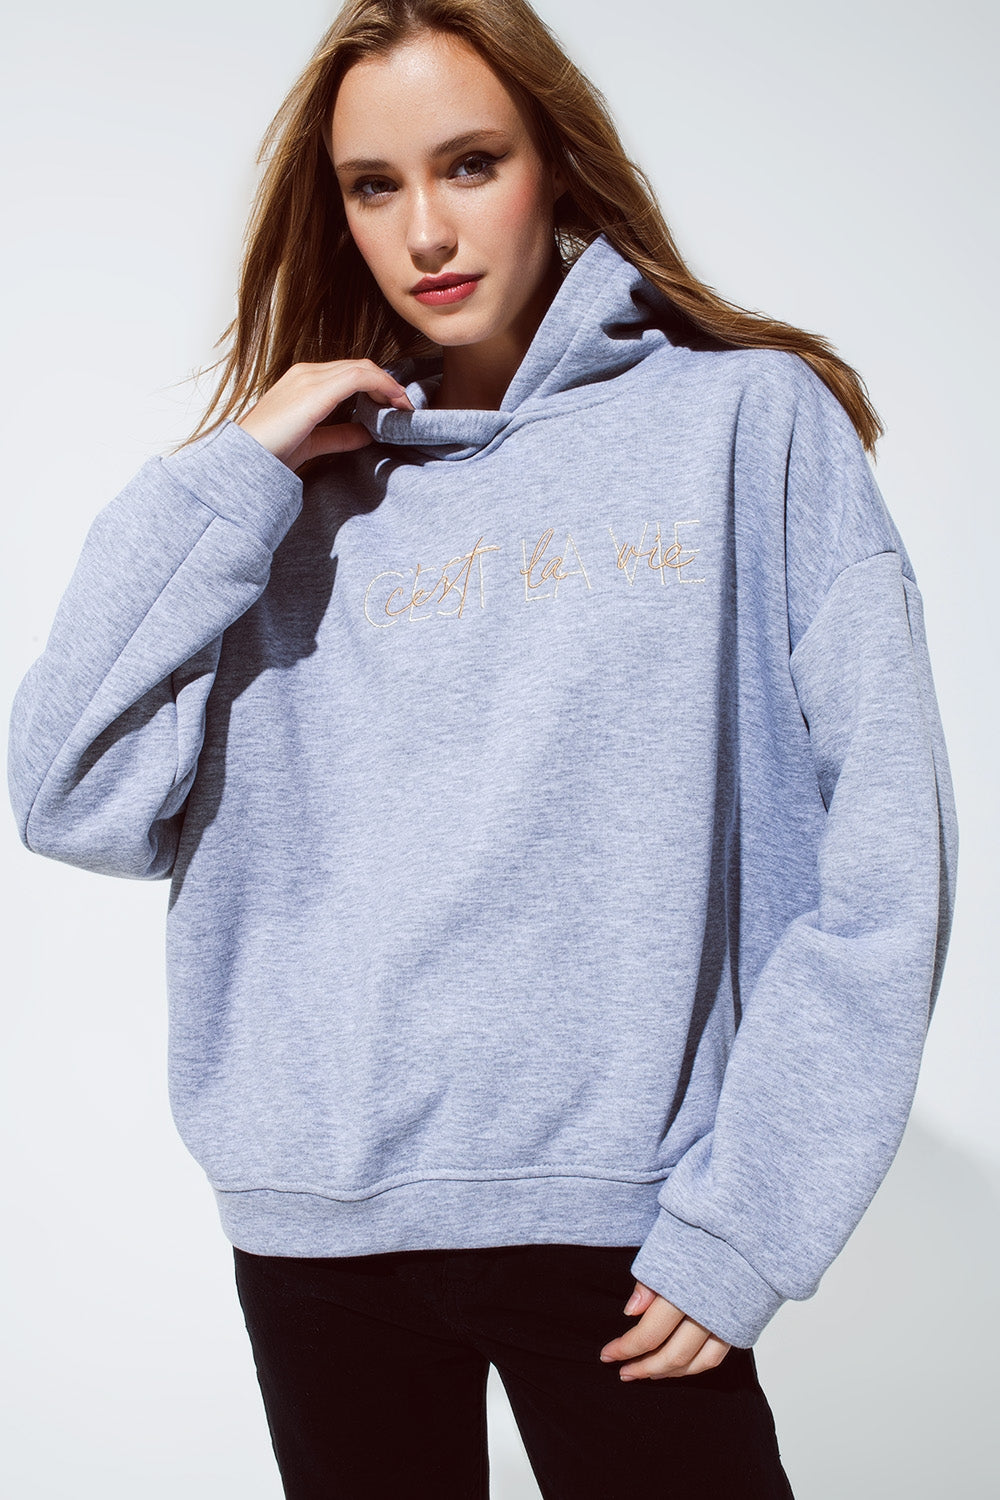 Grey Color Hoodie with Embroidered Cést La Vie Text